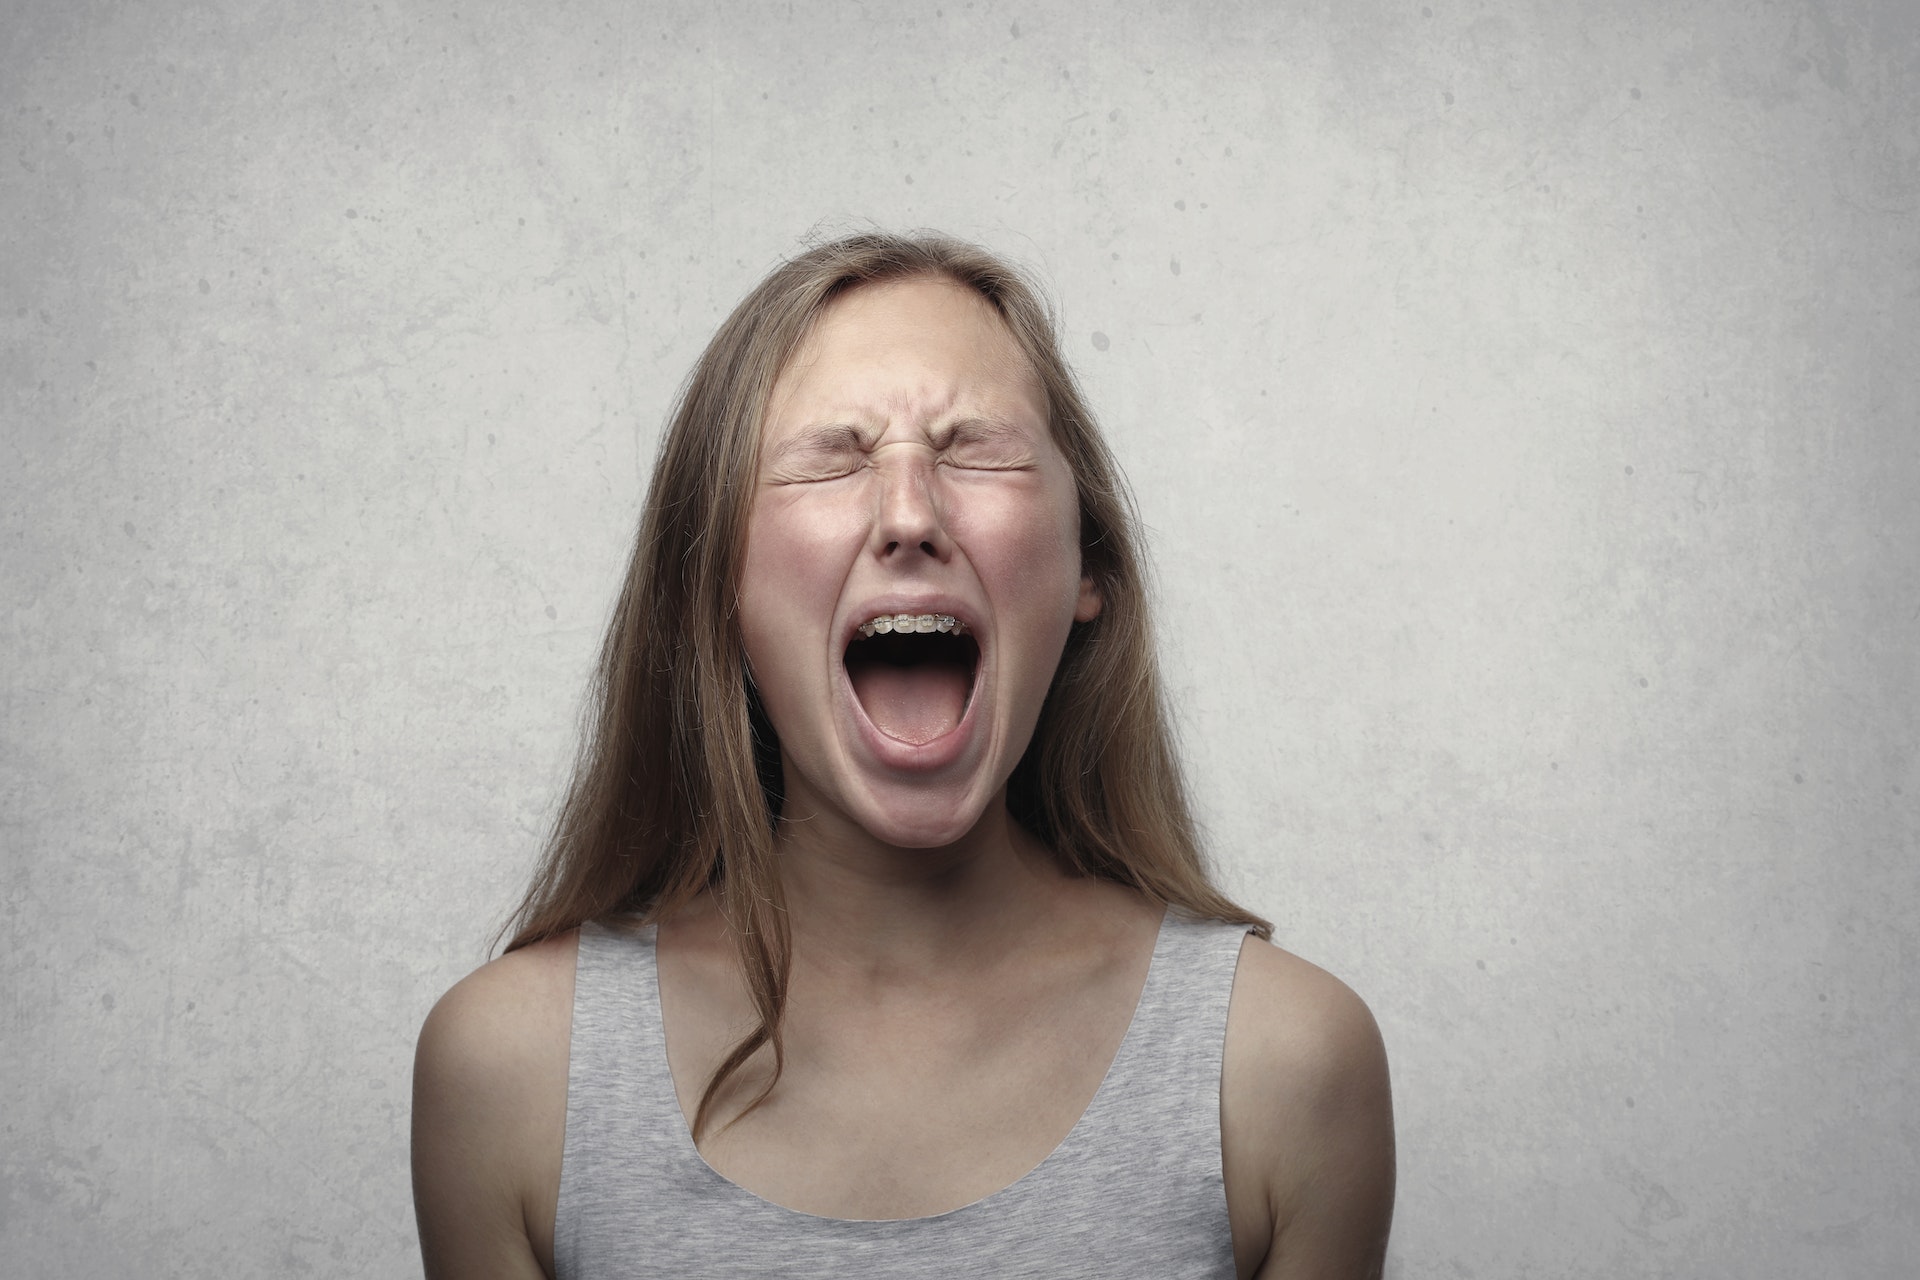 A woman screaming with her eyes closed | Source: Pexels